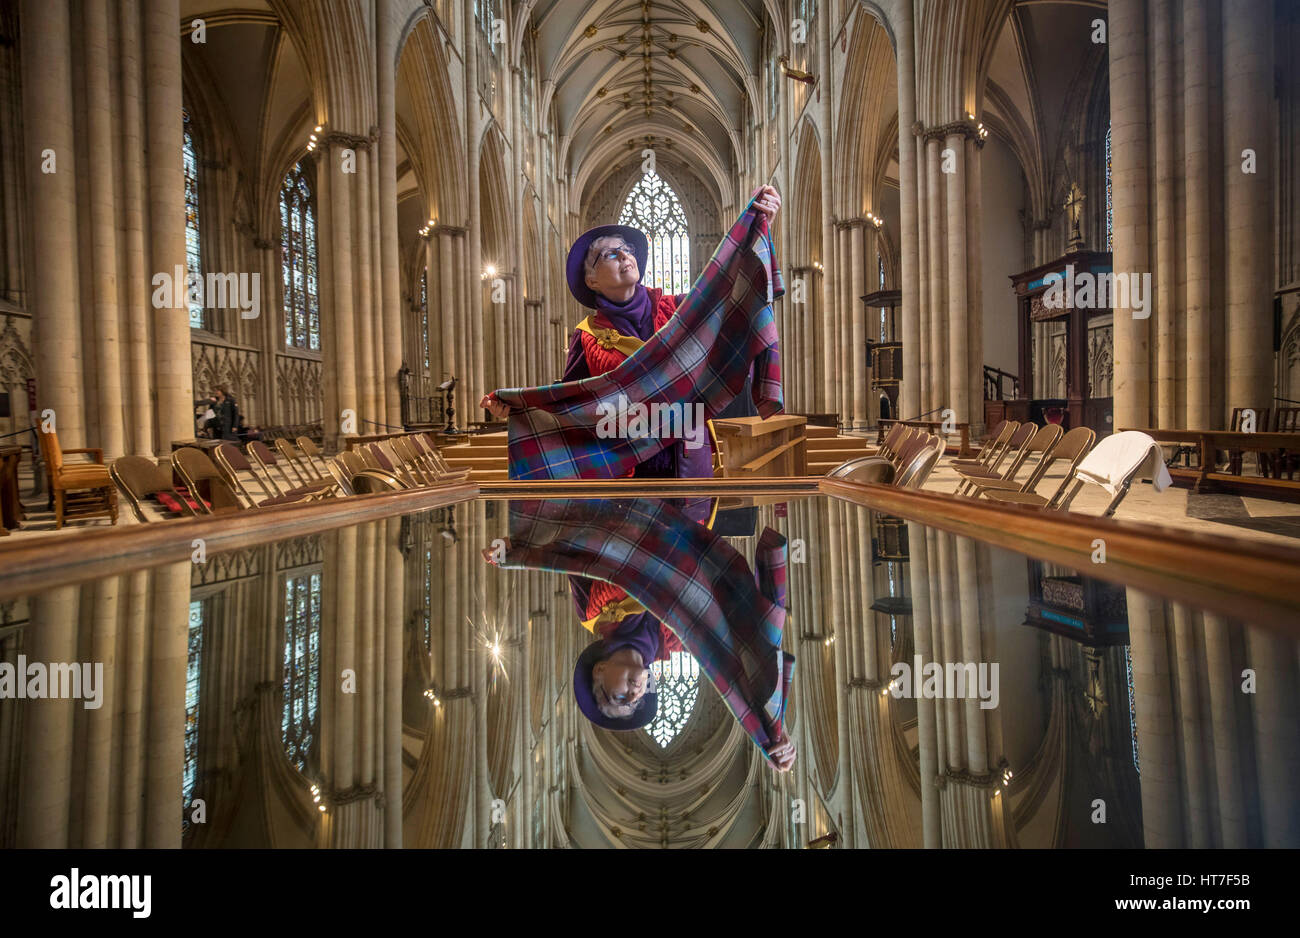 International Women&acirc;€™s Day is celebrated at York Minster as Issy Sanderson holds material used to make feminine hygiene kits for girls in developing countries, while being reflected in a mirror used by visitors to view the ceiling of the Minister. Stock Photo